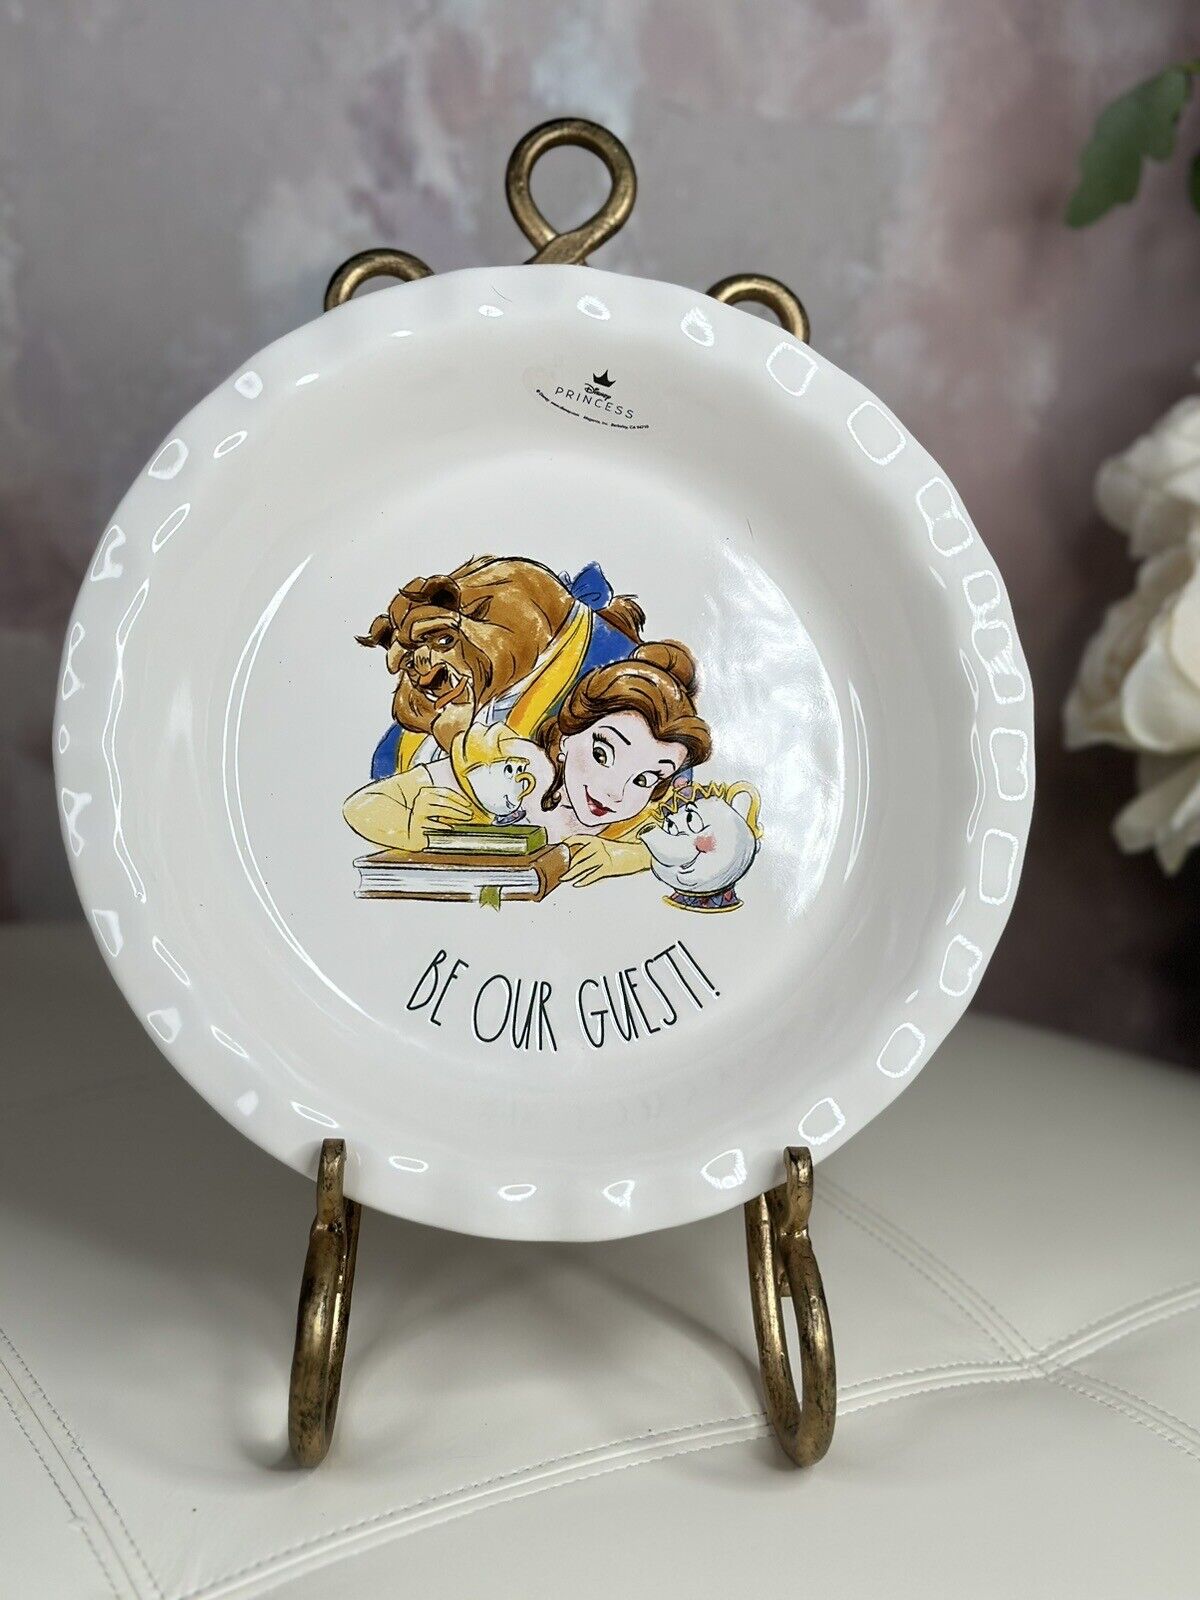 New Rae Dunn Pie Dish BE OUR GUEST Disney Princess Beauty and the Beast RARE